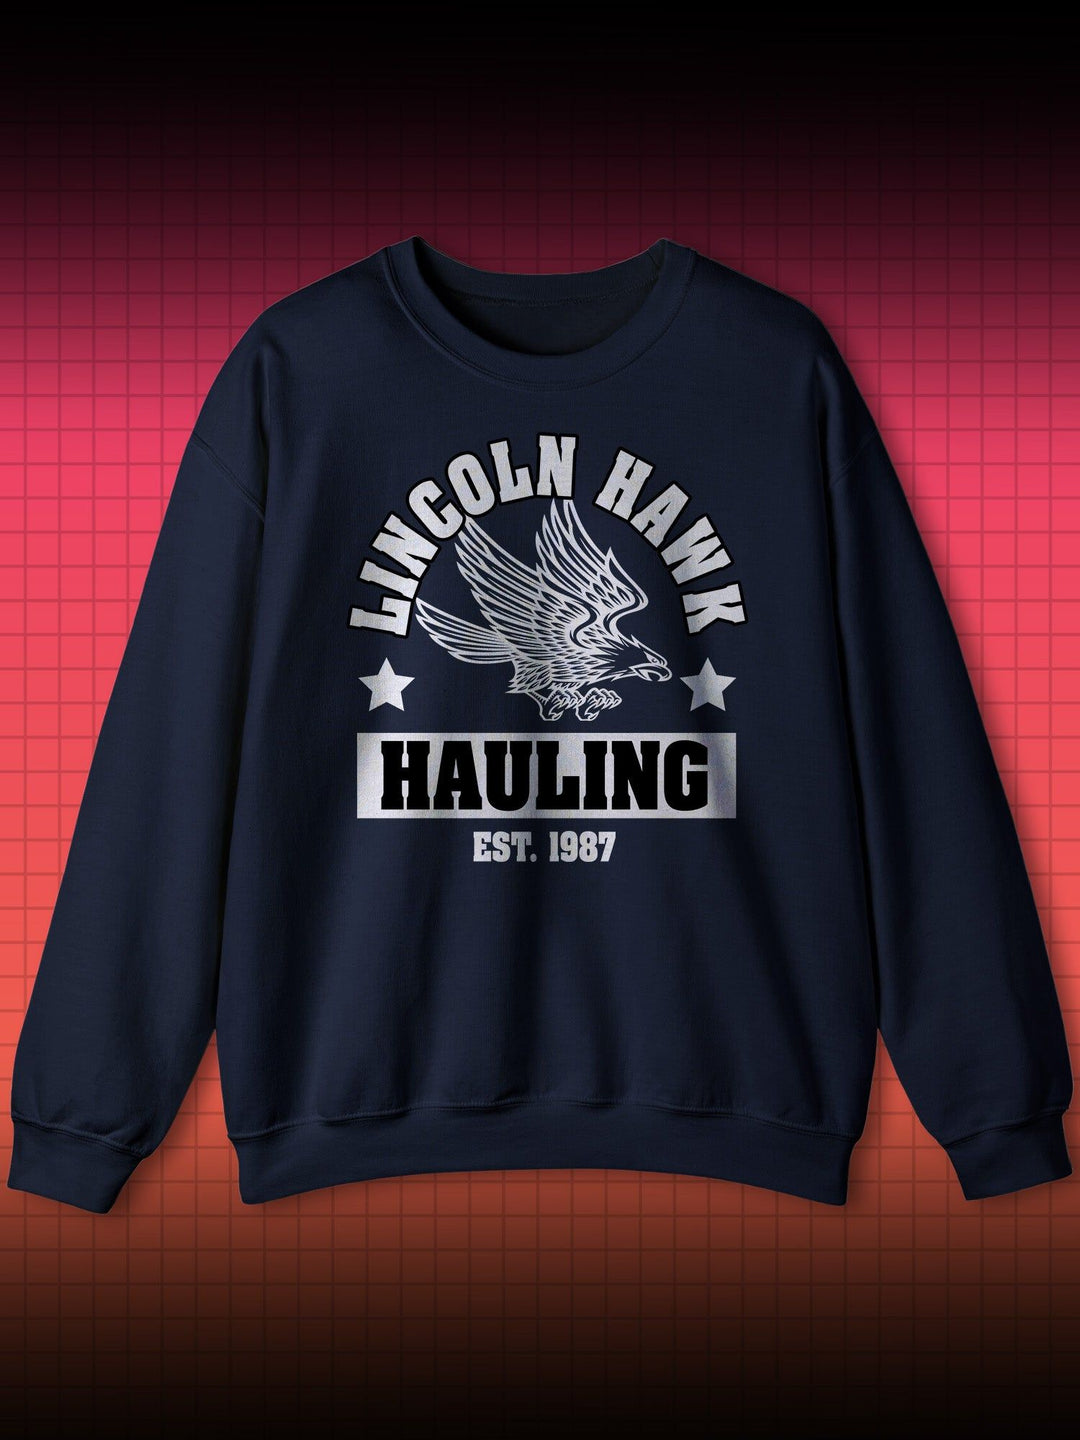 LINCOLN HAWK & SON HAULING LOGO | OVER THE TOP SYLVESTER STALLONE | SWEATSHIRT & HOODIE - DRAMAMONKS